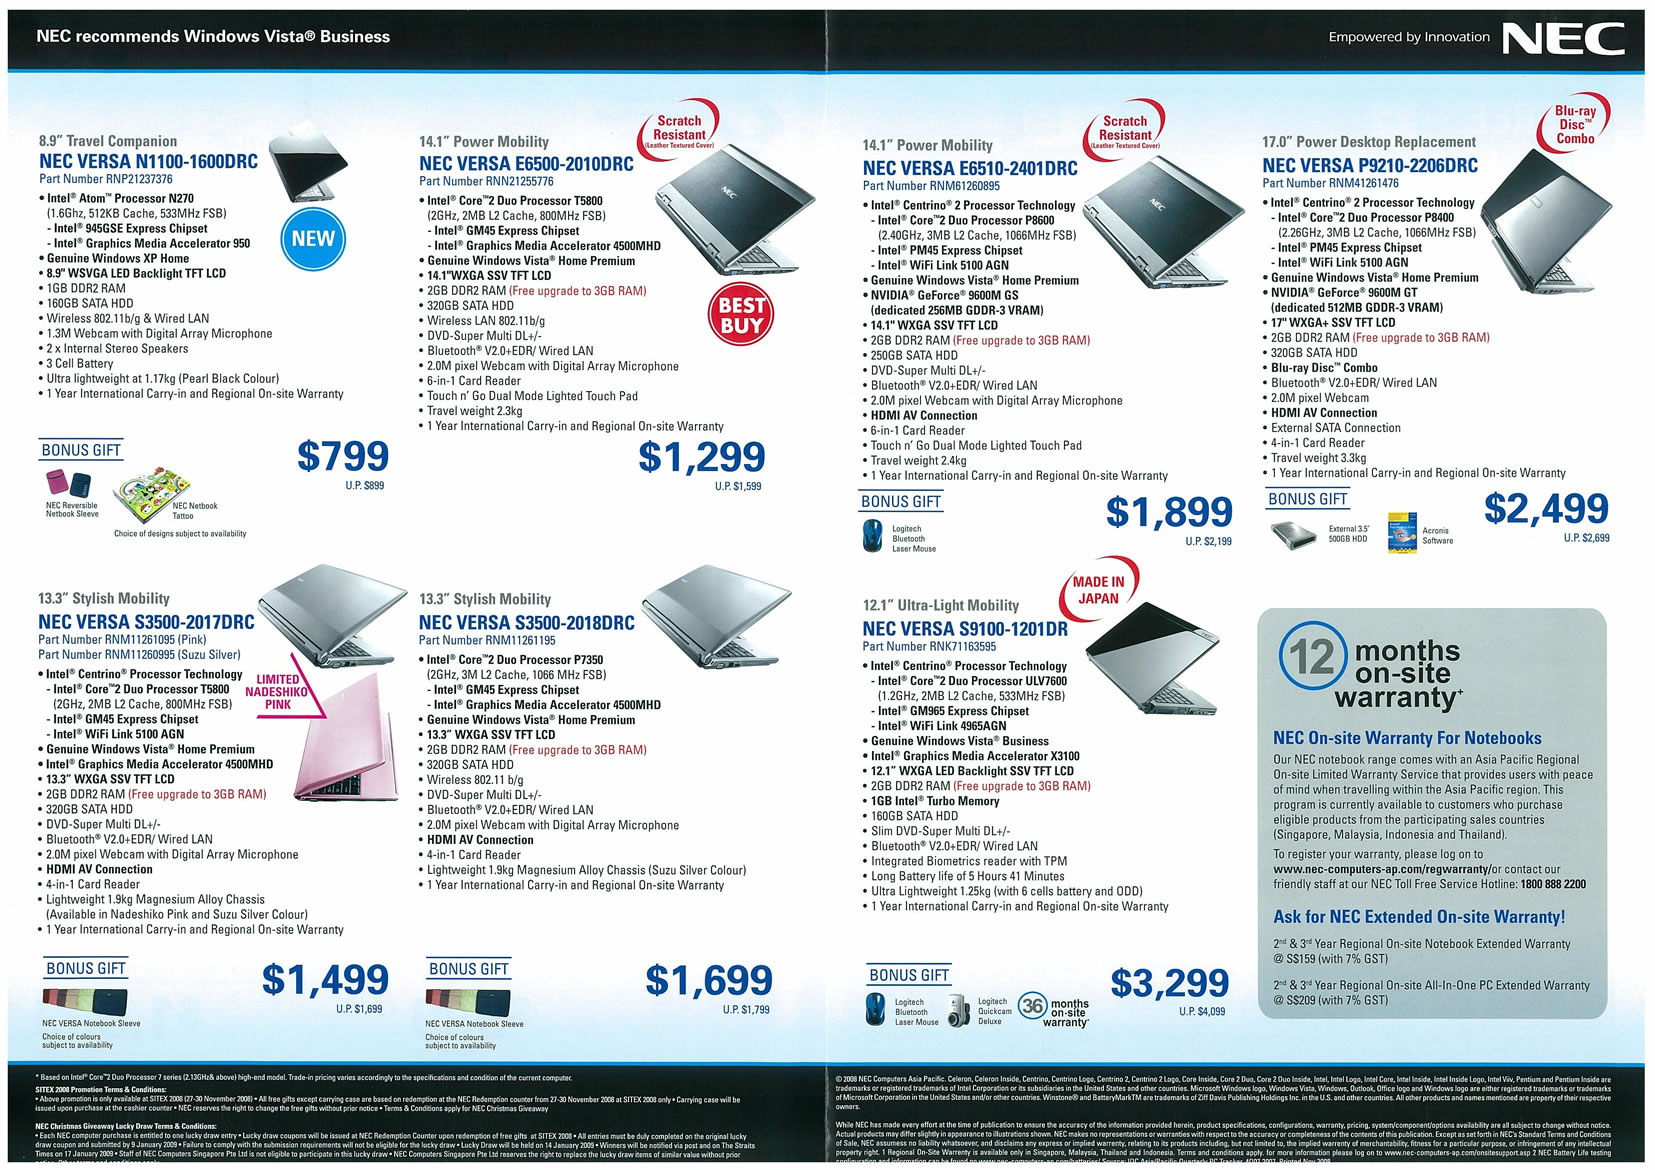 Sitex 2008 price list image brochure of NEC Notebooks Page 2 - Vr-zone Tclong